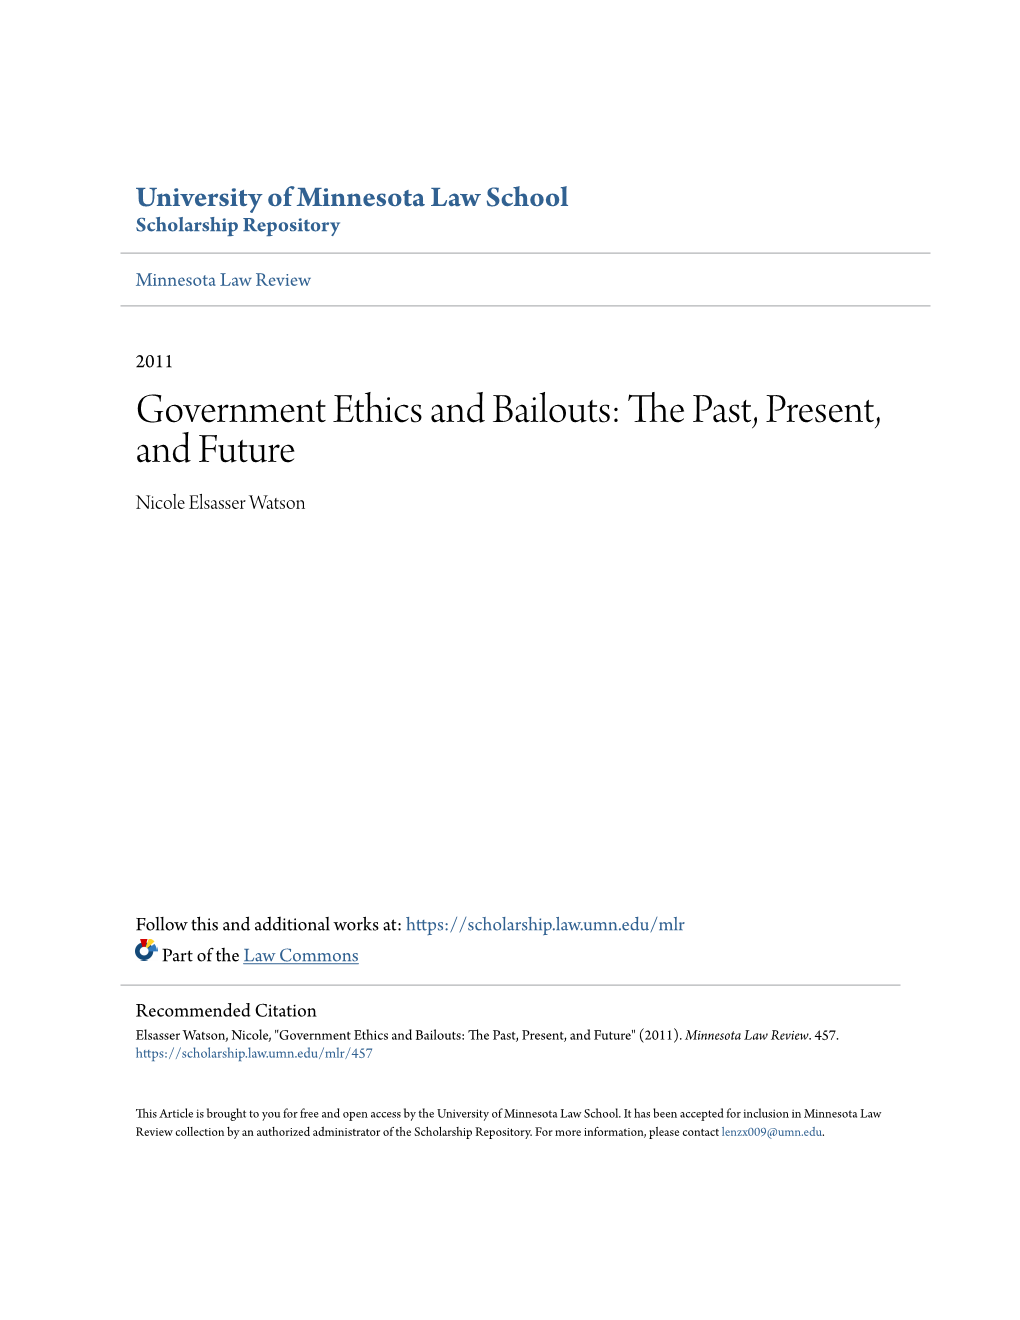 Government Ethics and Bailouts: the Past, Present, and Future